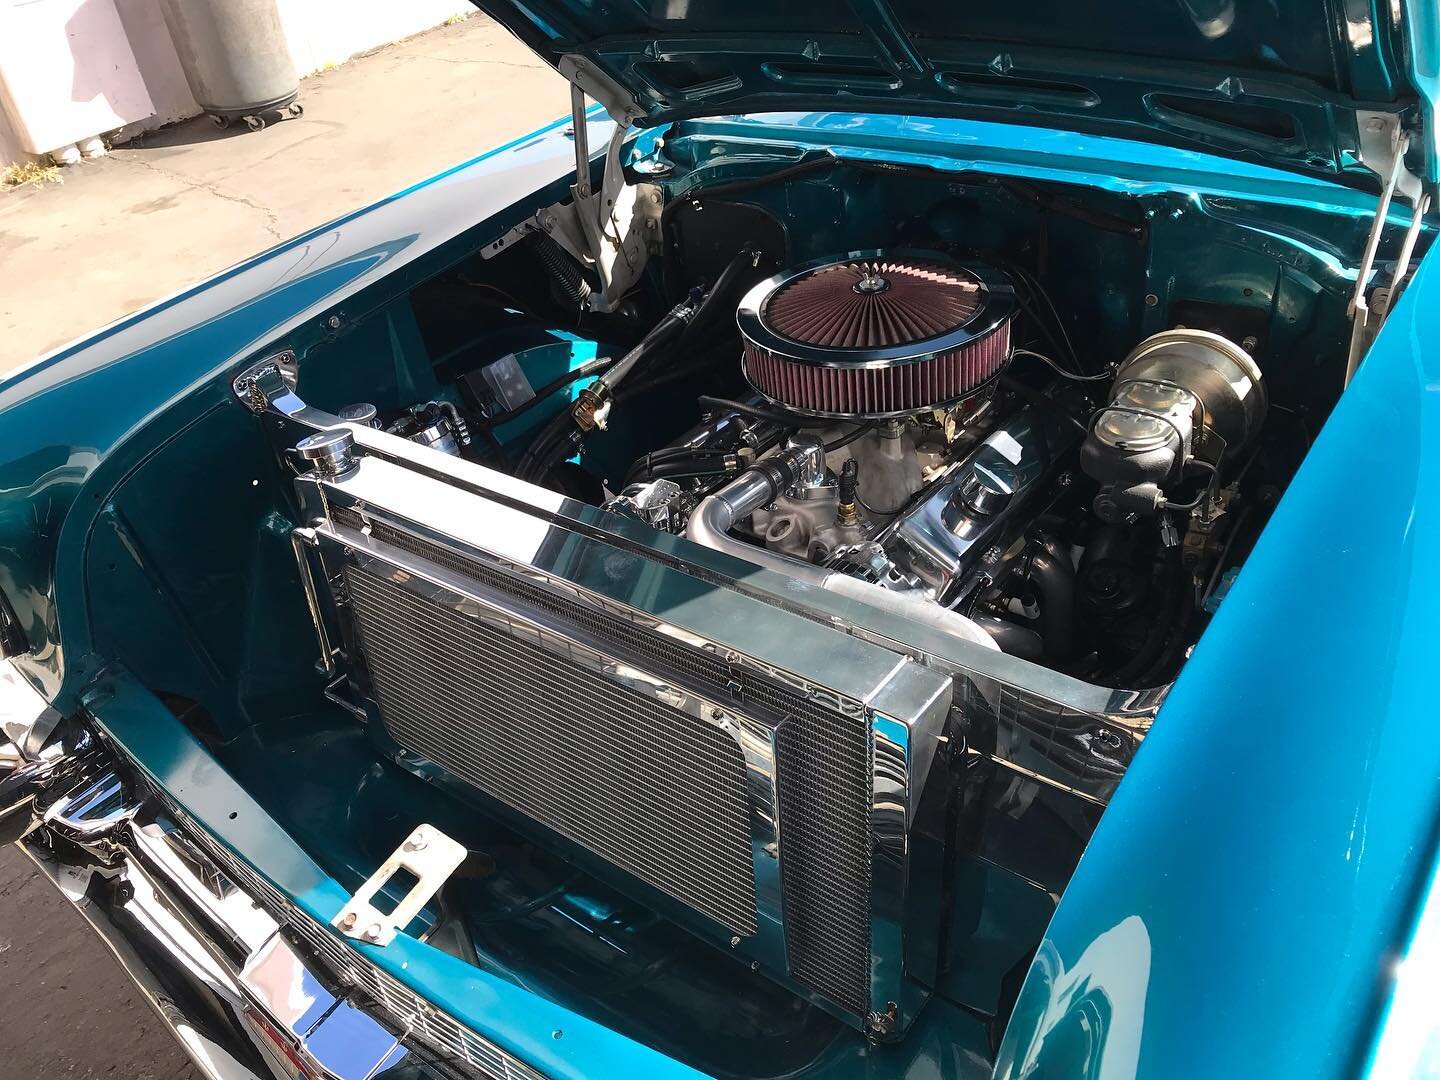 Tony did a great job cleaning up the engine bay of this beautiful 57 Chevy. New PRC radiator and core support combo, @billetspecialties front drive and we cleaned up some of the plumbing where we could.